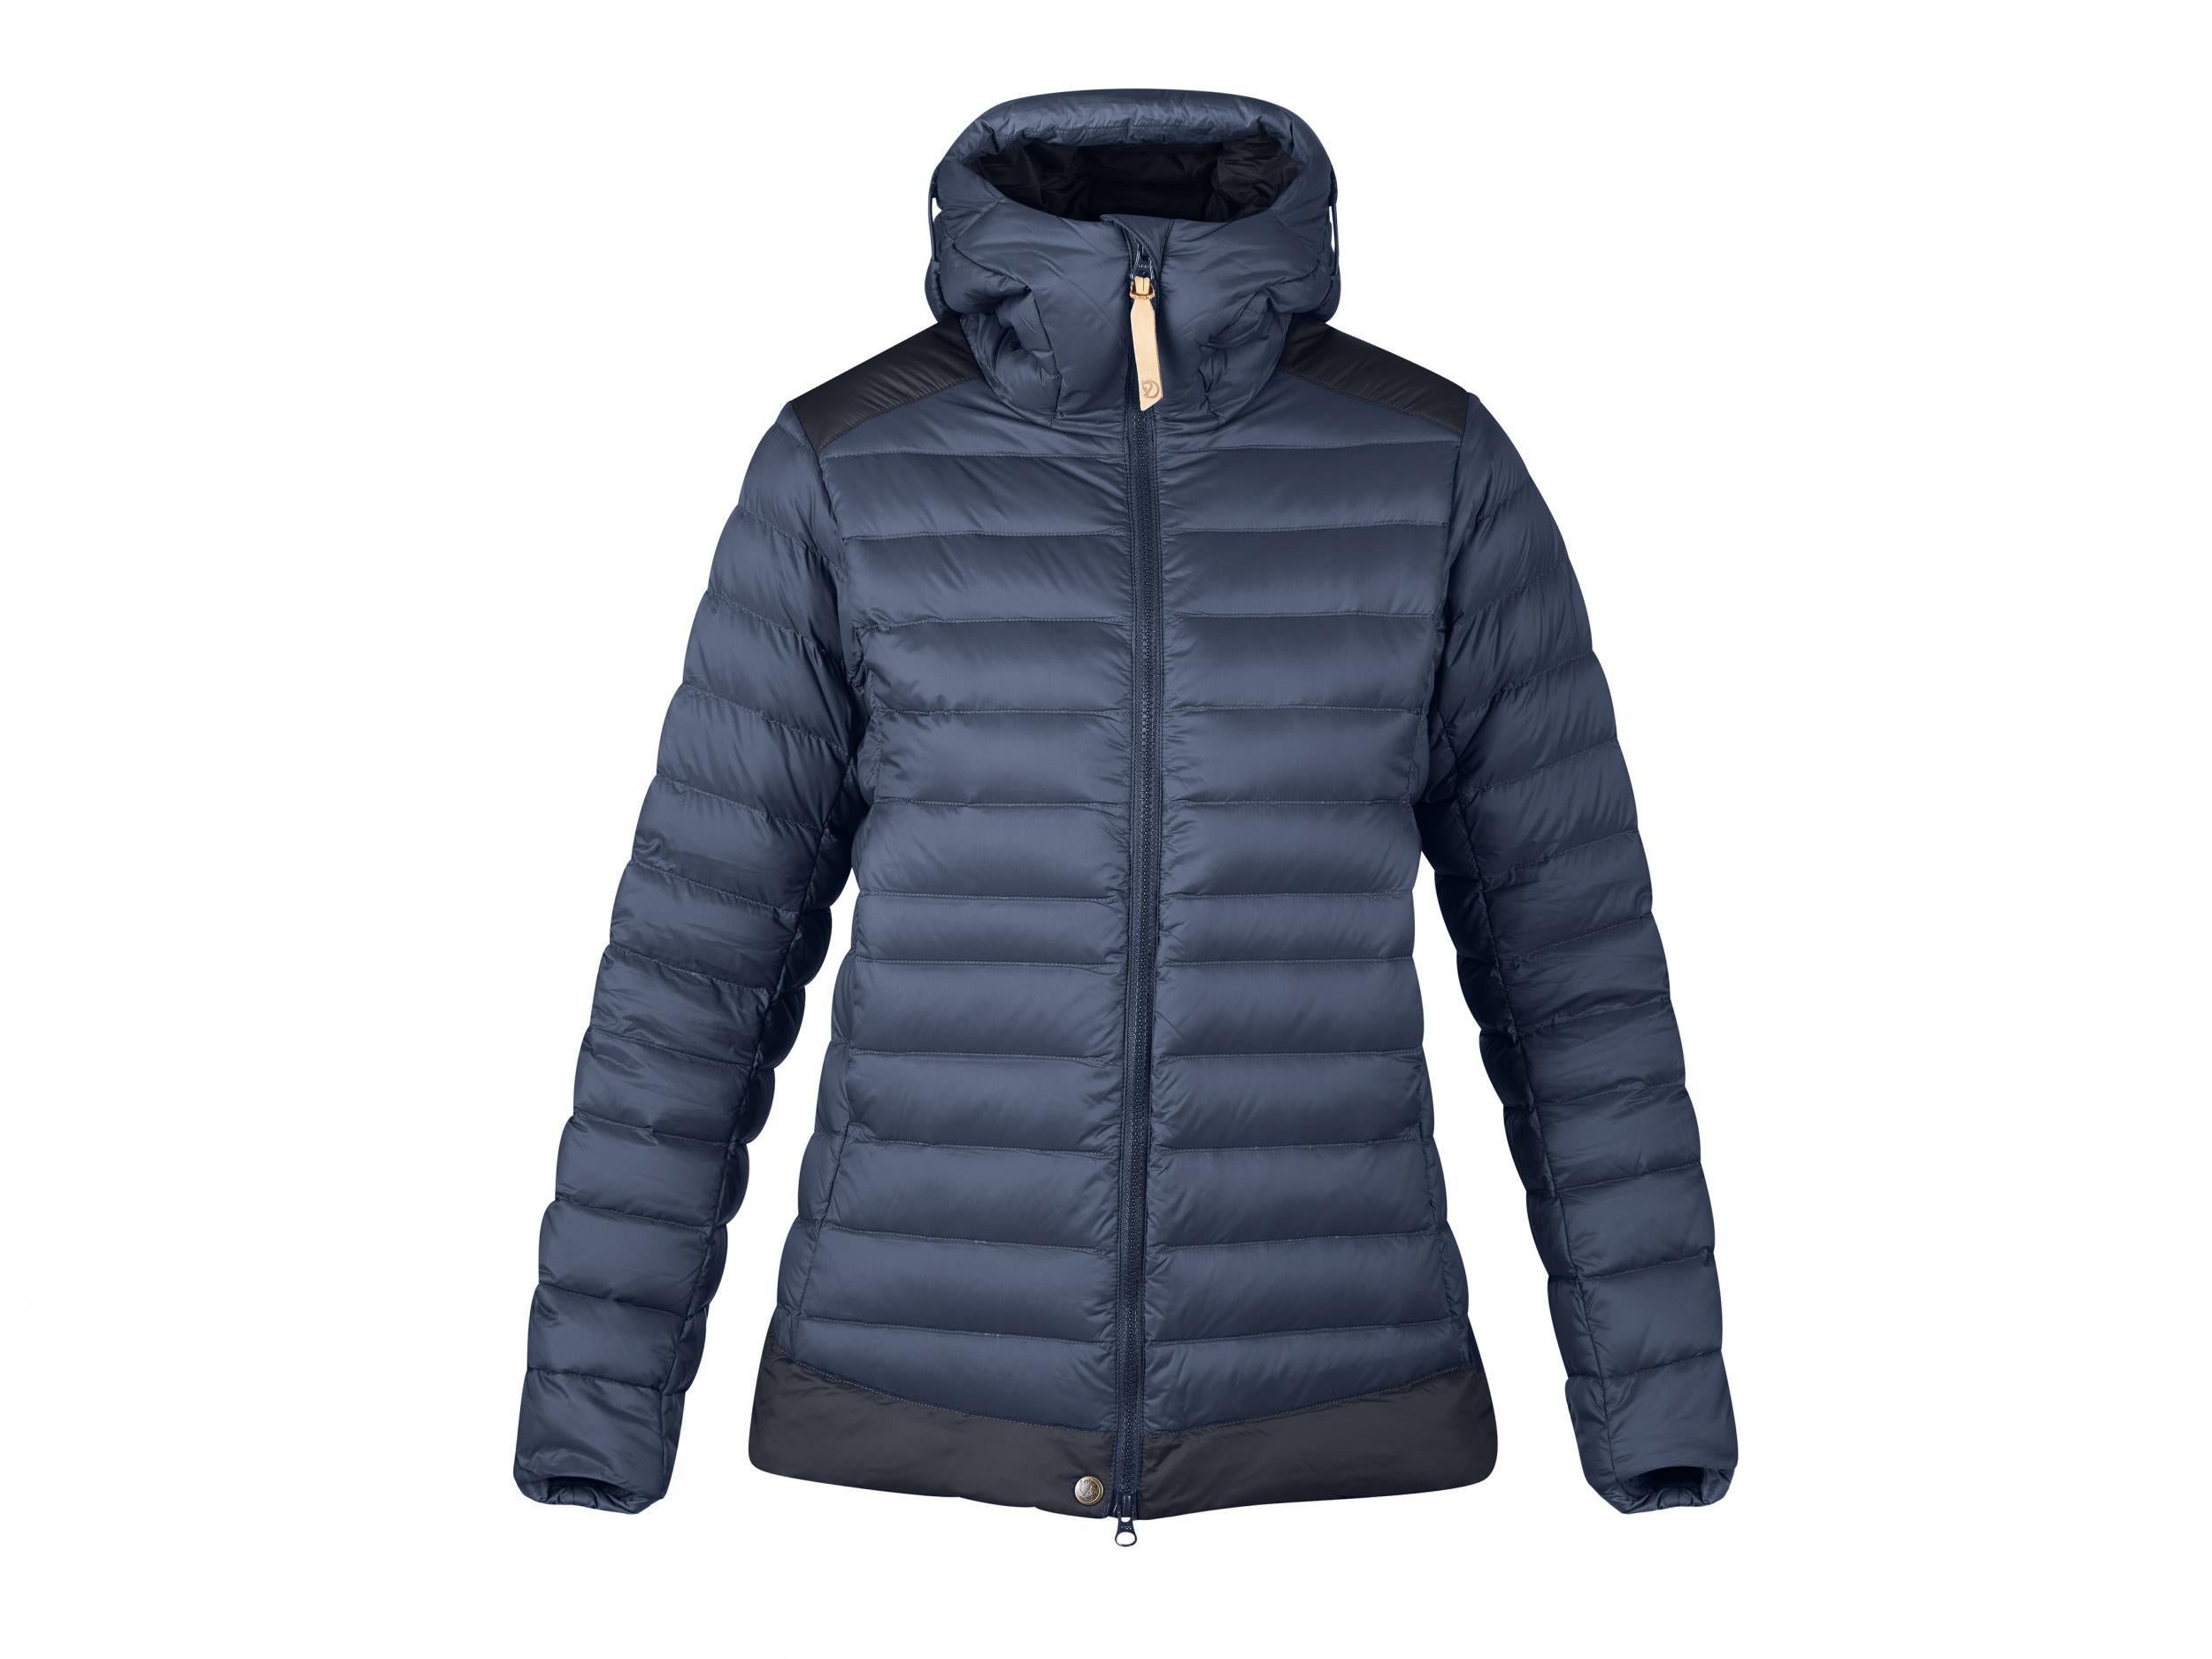 Best Insulated Jackets For Women From Synthetic To Ethically